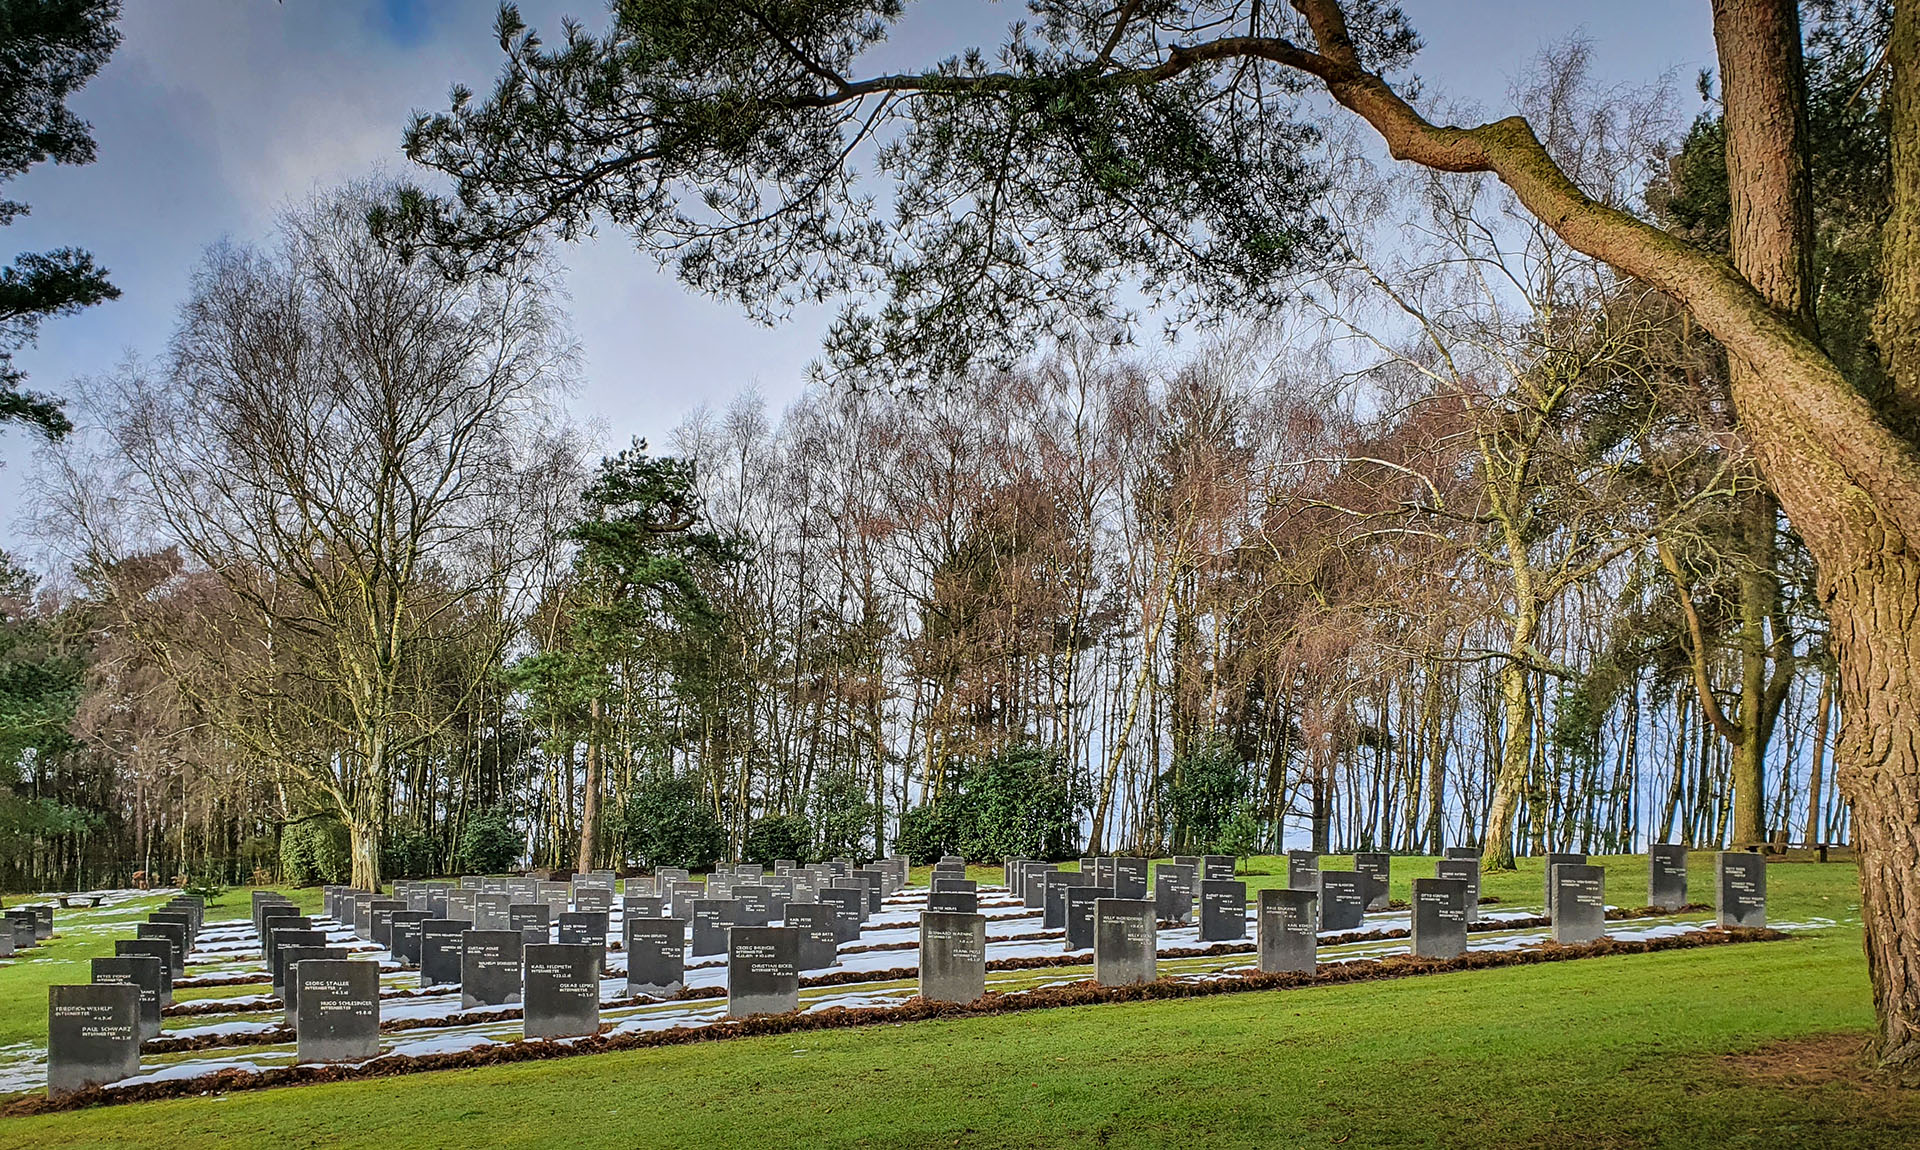 The Cannock Chase German Cemetery, established in 1959 as the burial ground for all German nationals dying on British soil in both world wars, and not buried in other sites